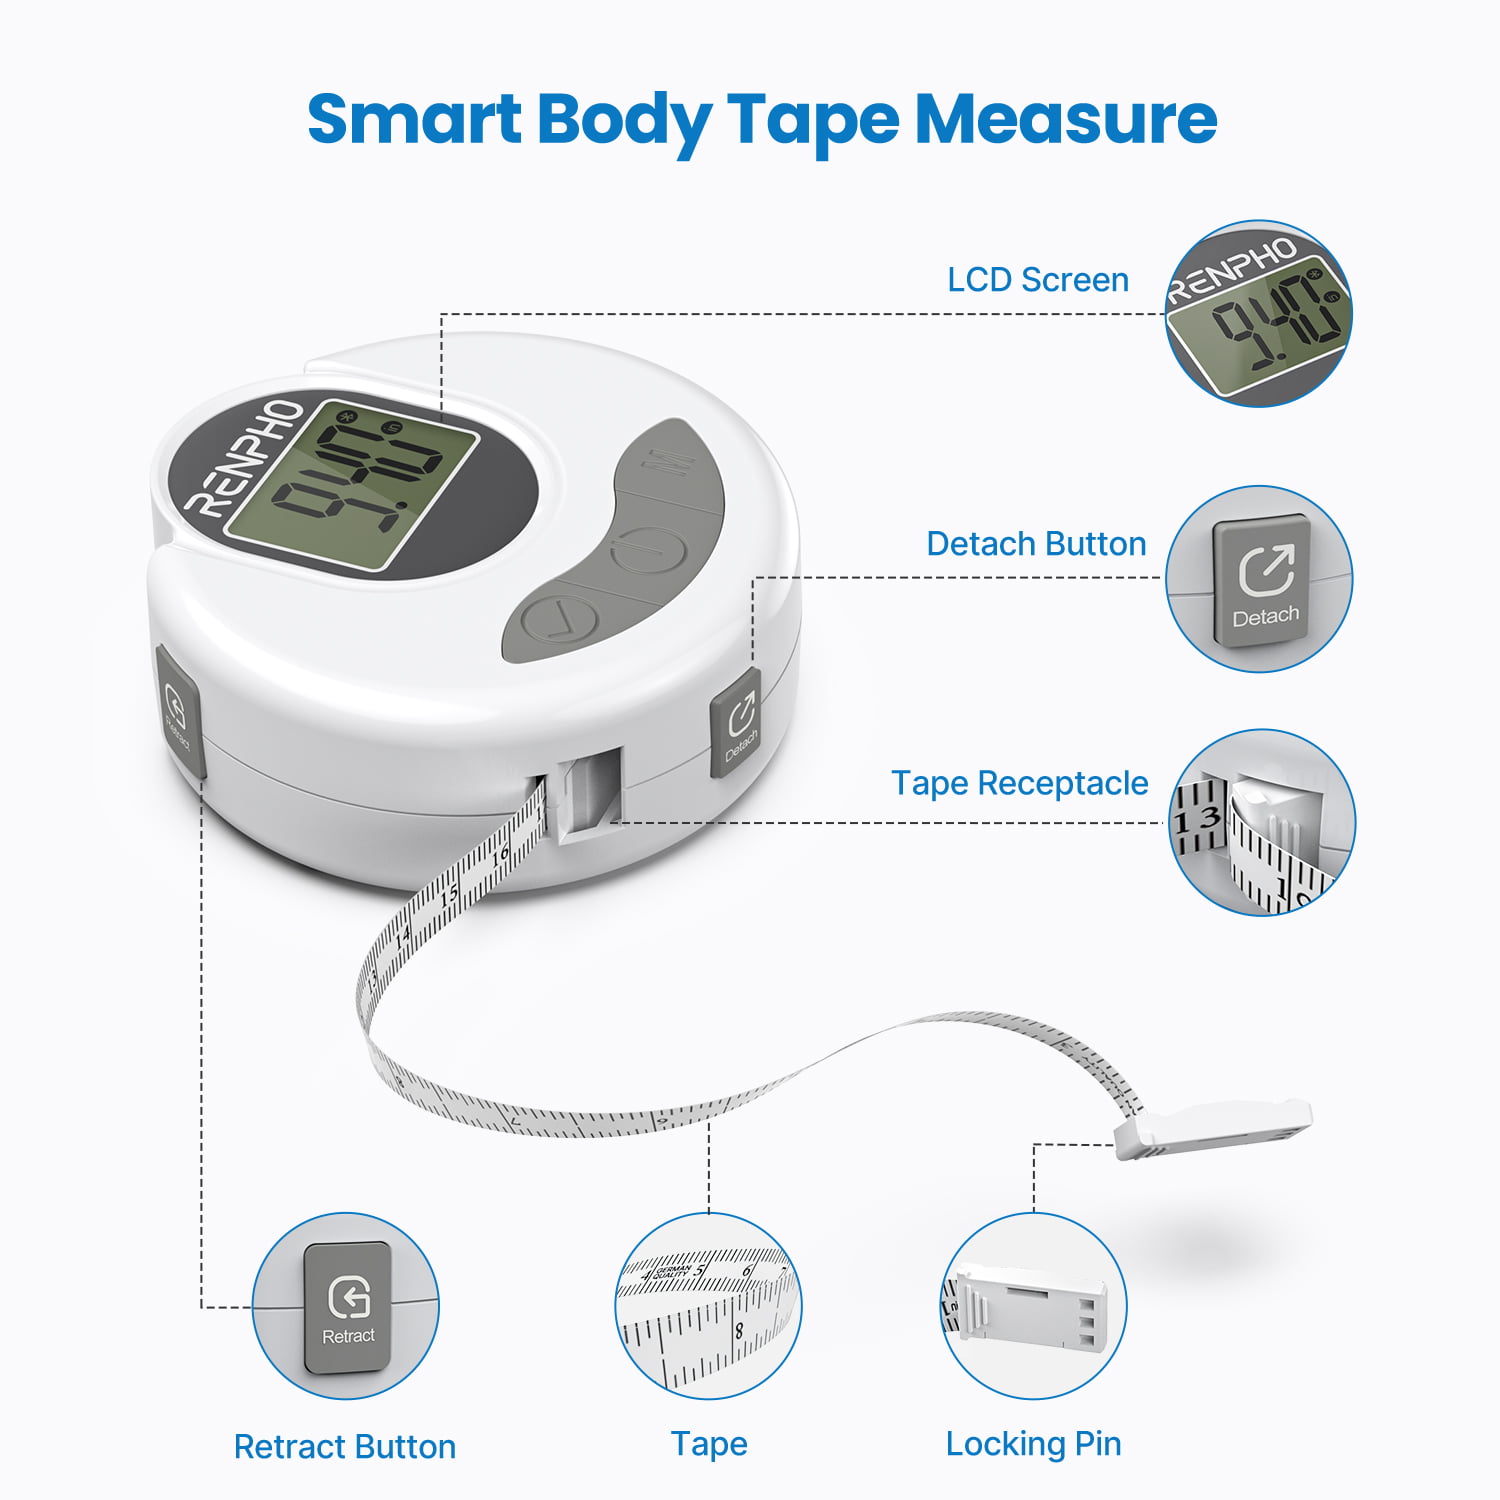 RENPHO Smart Tape Measure Body with App - RENPHO Bluetooth Measuring Tapes for Body Measuring, Weight Loss, Muscle Gain, Fitness Bodybu